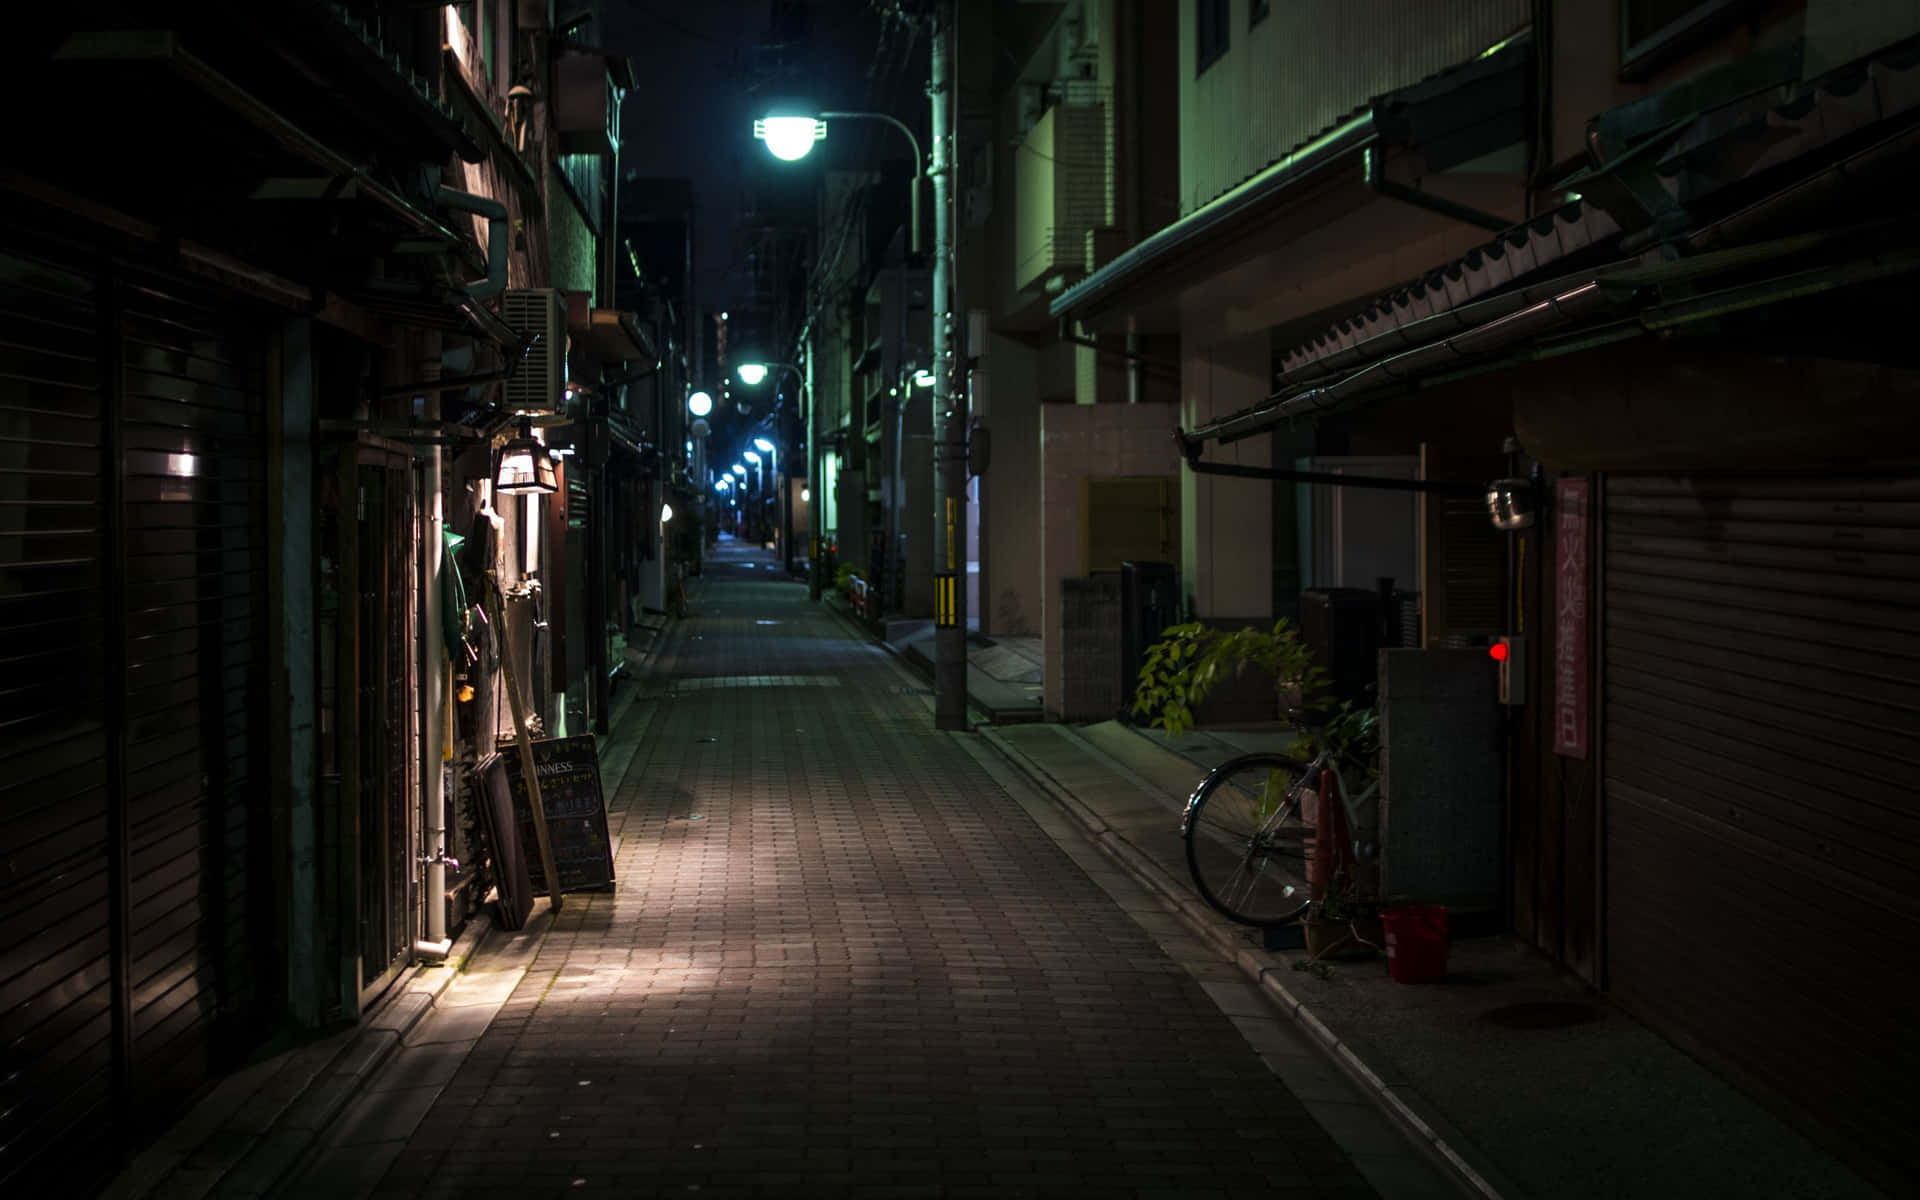 "The Soft Glow of a Night Street"